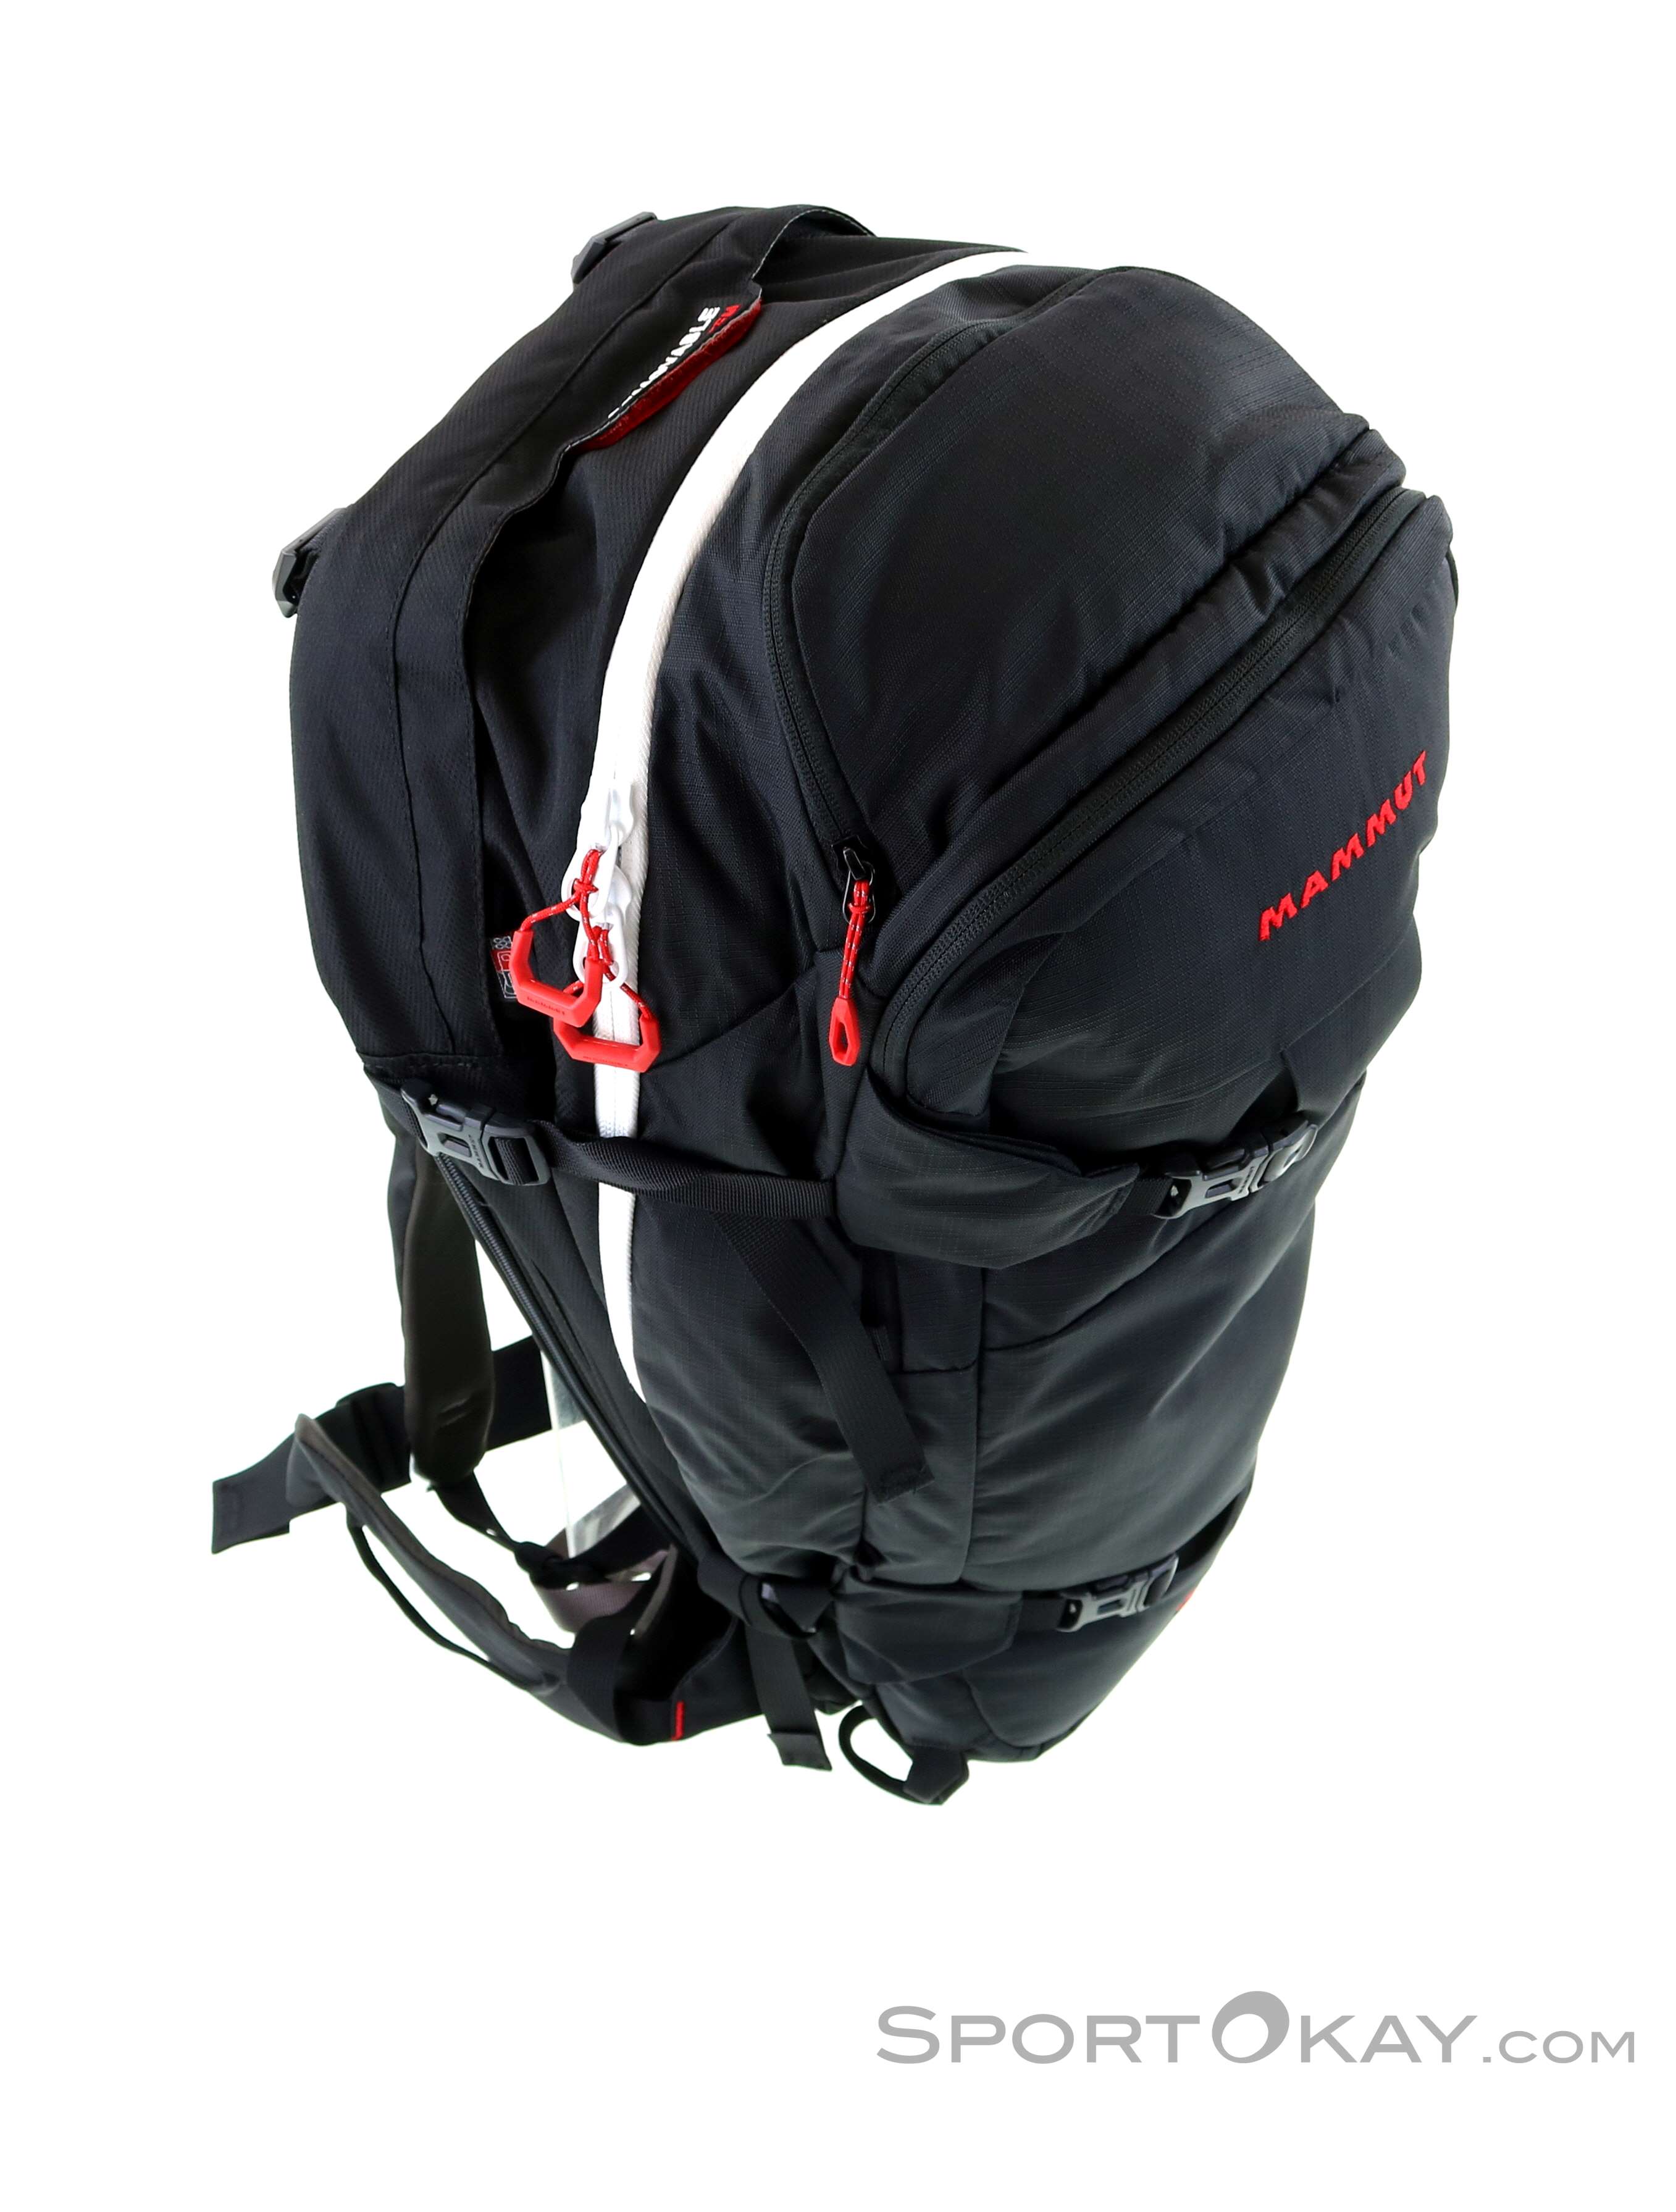 thema Calamiteit goud Mammut Pro RAS 3.0 45l Airbag Backpack without cartridge - Backpacks -  Safety - Ski & Freeride - All